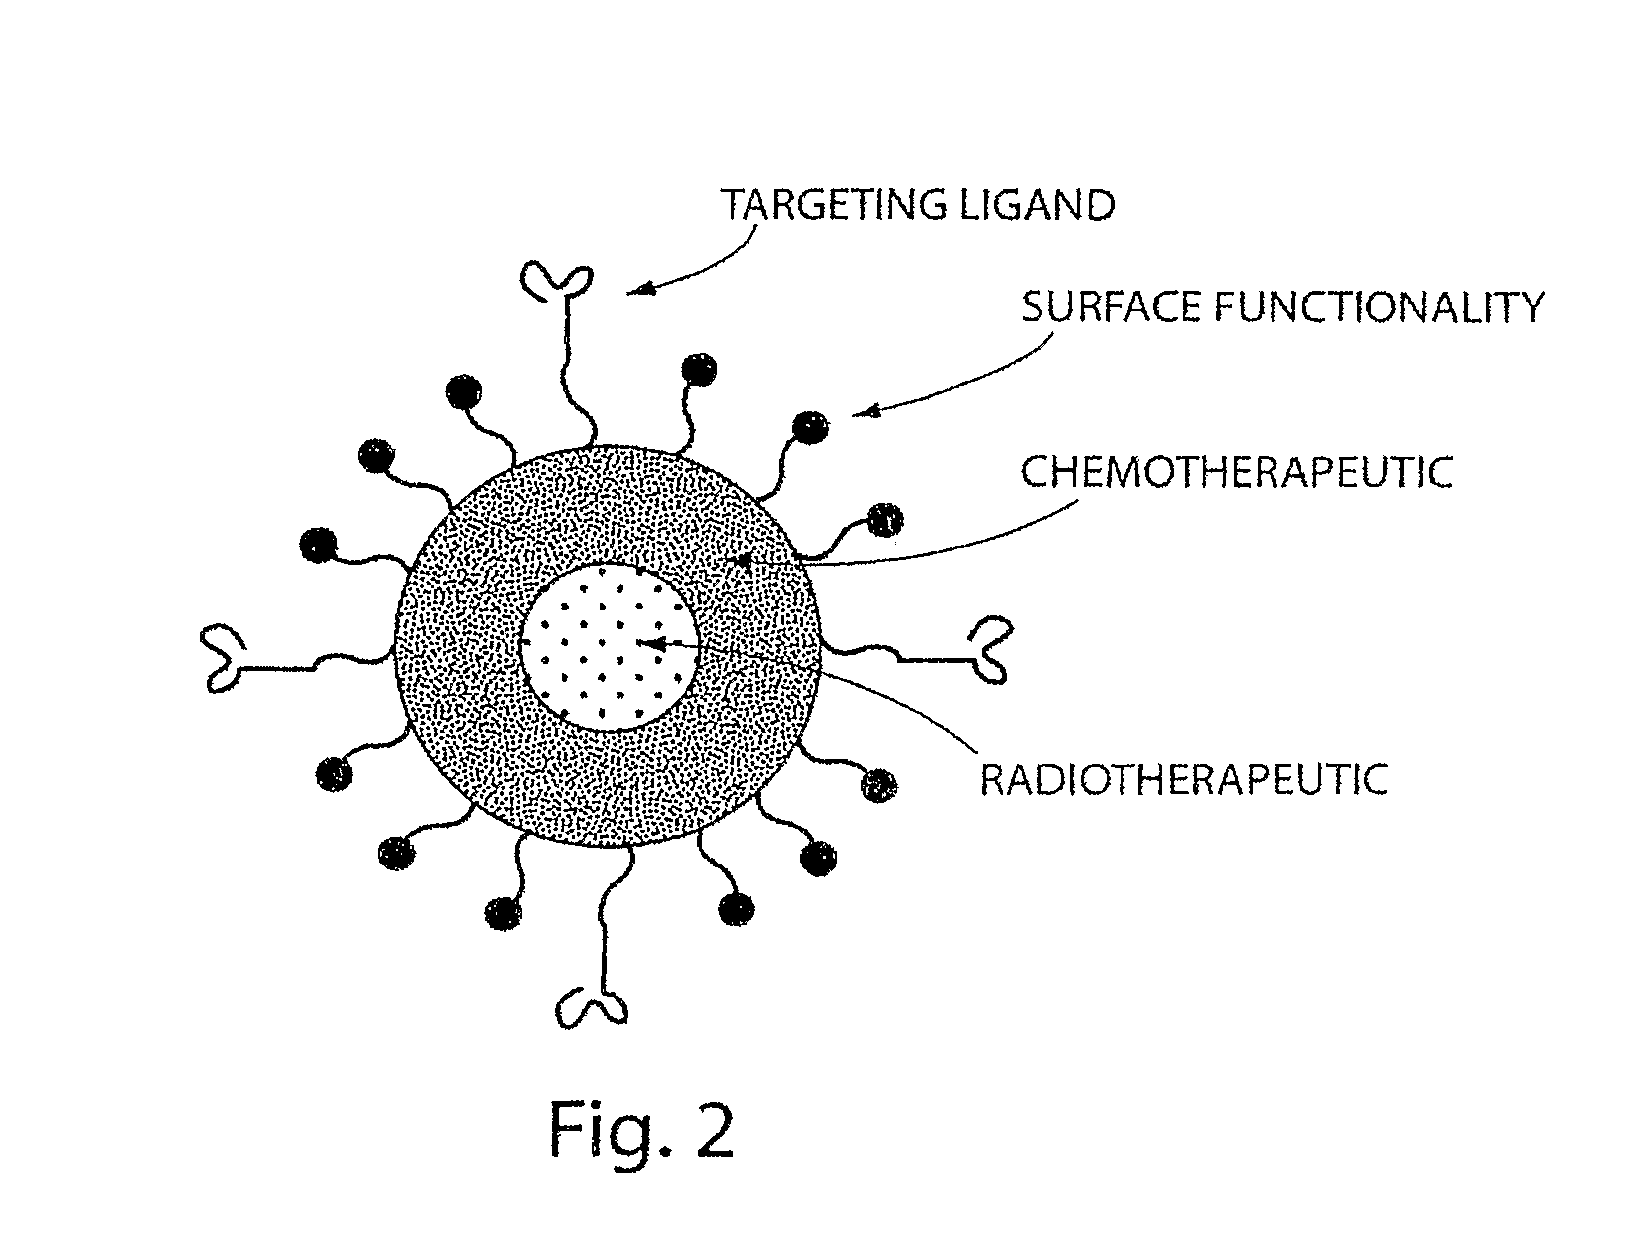 Drug delivery system for pharmaceuticals and radiation